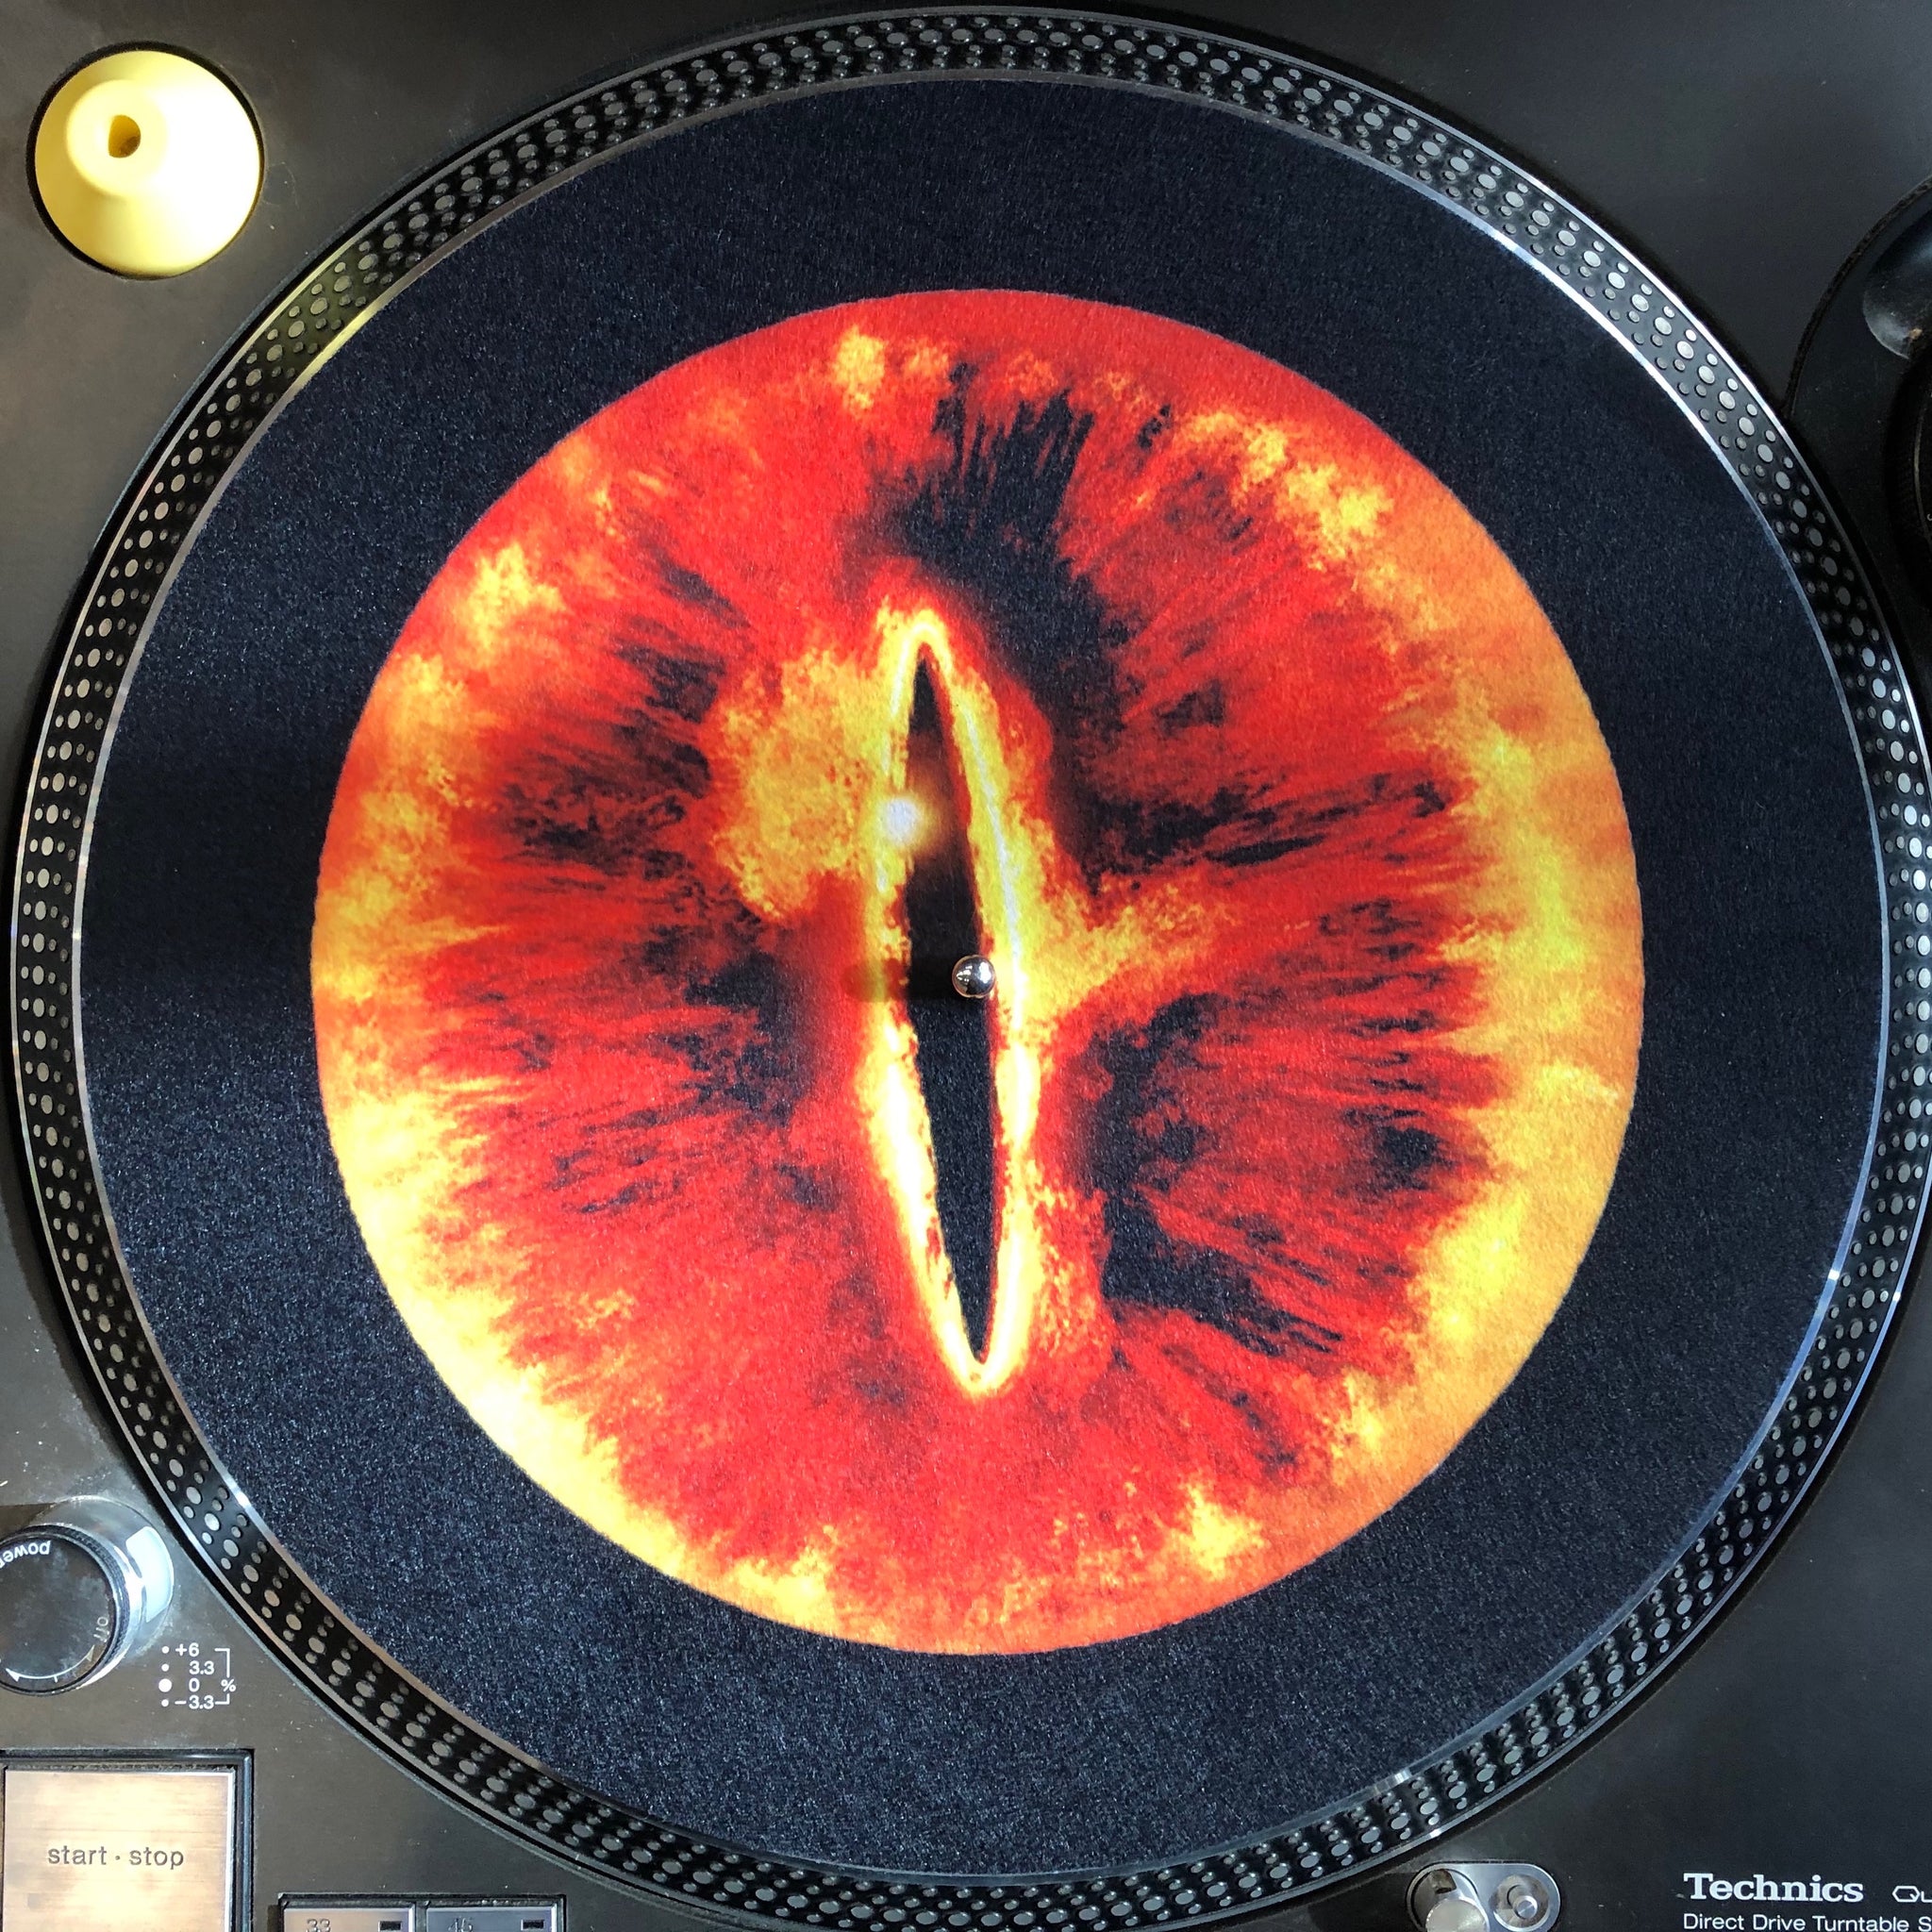 New Limited Edition Vinyl Record Slipmat J. R. R. Tolkien's The Lord of the Rings - Eye Of Sauron Slip Mat